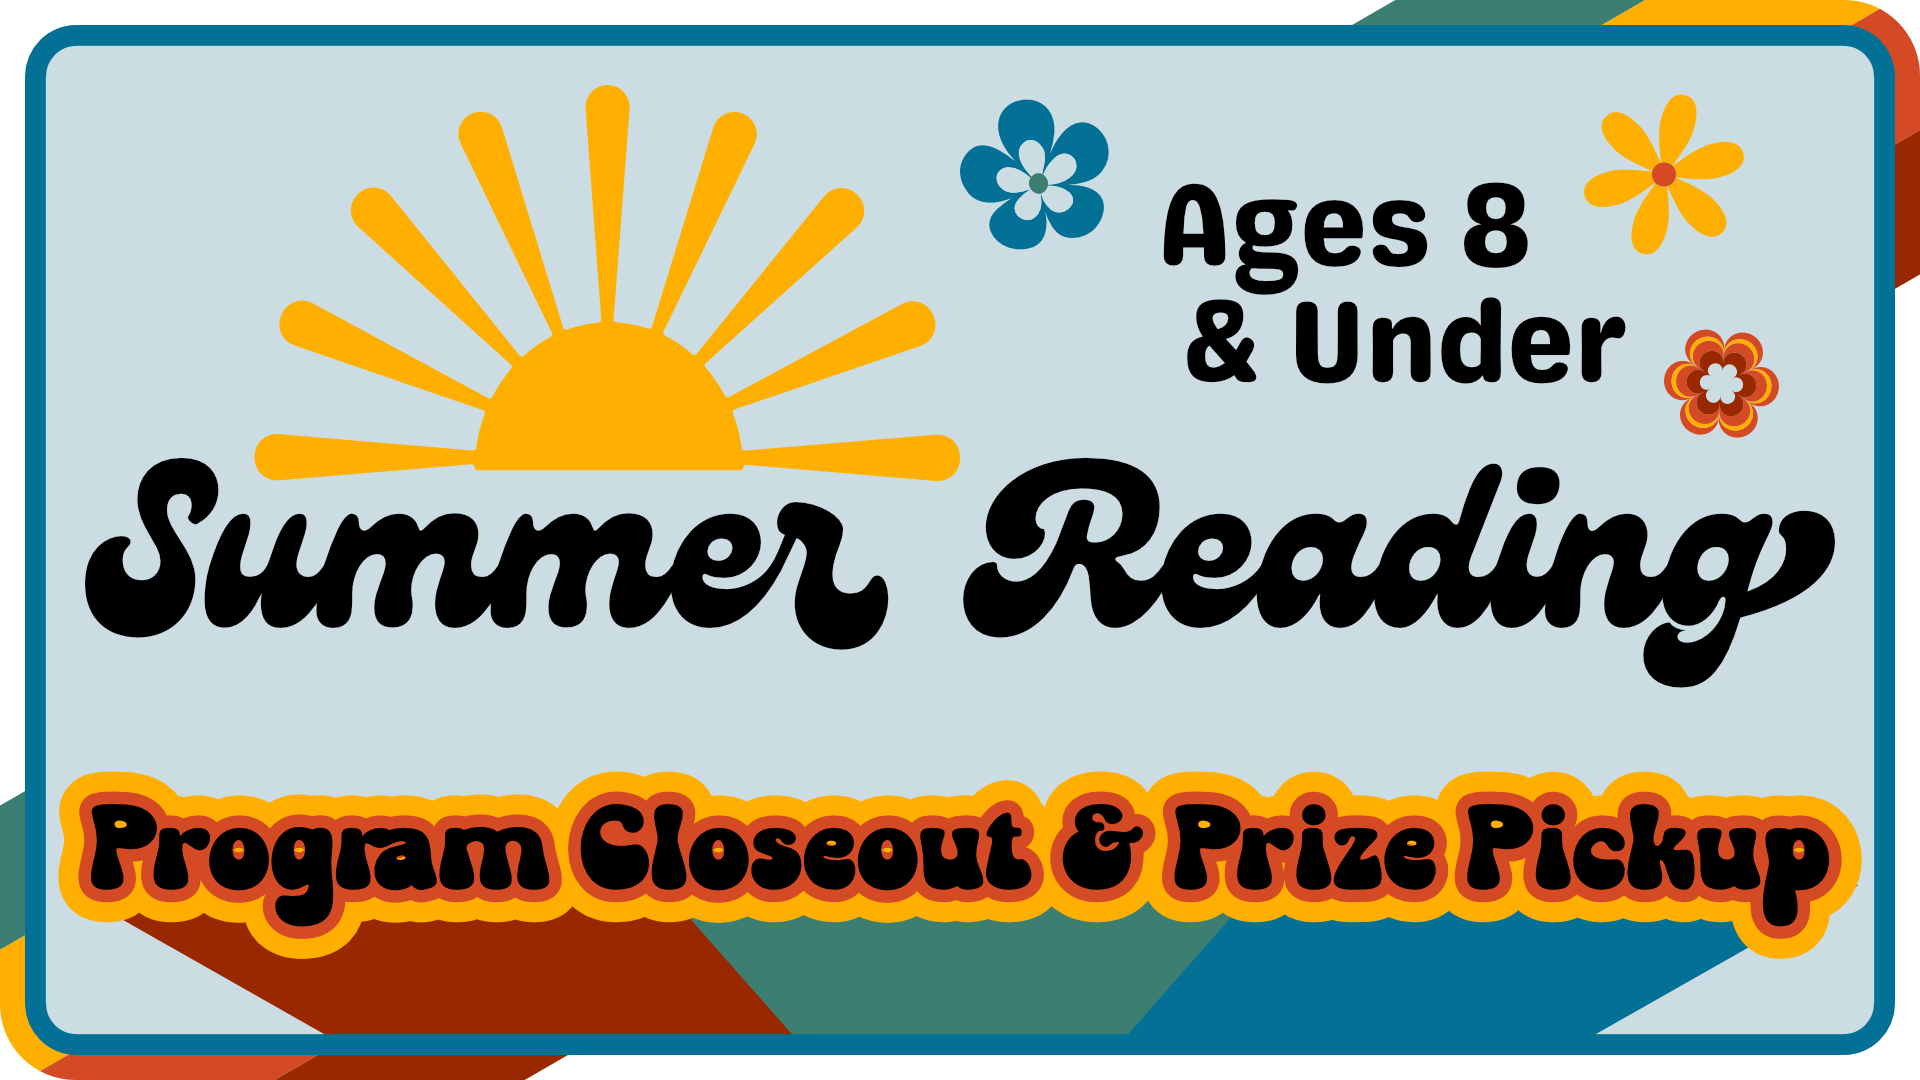 Summer Reading program closeout and prize pickup for ages 8 and under